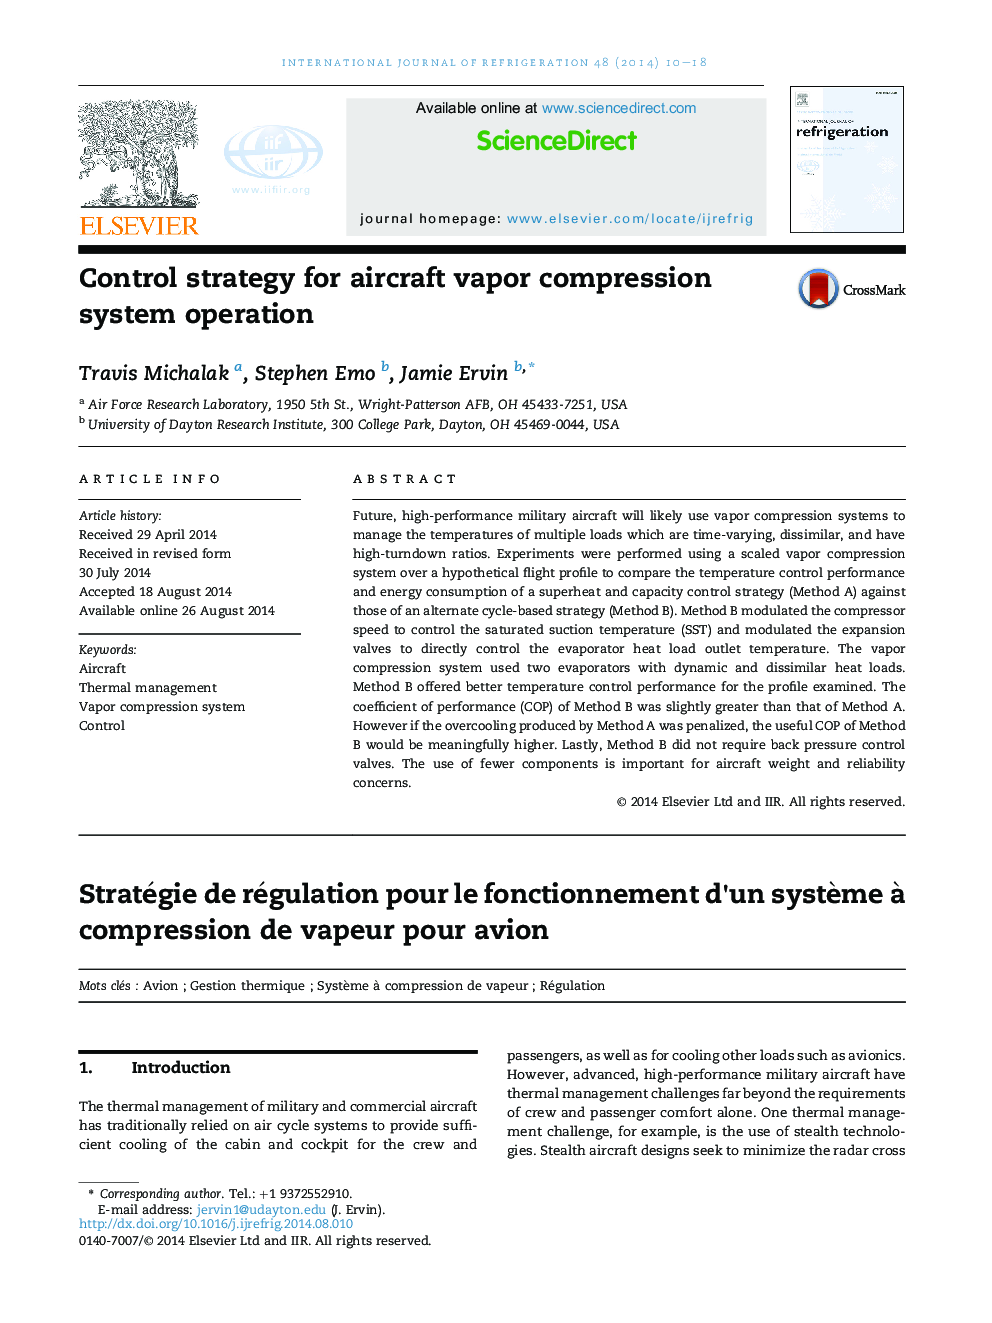 Control strategy for aircraft vapor compression system operation